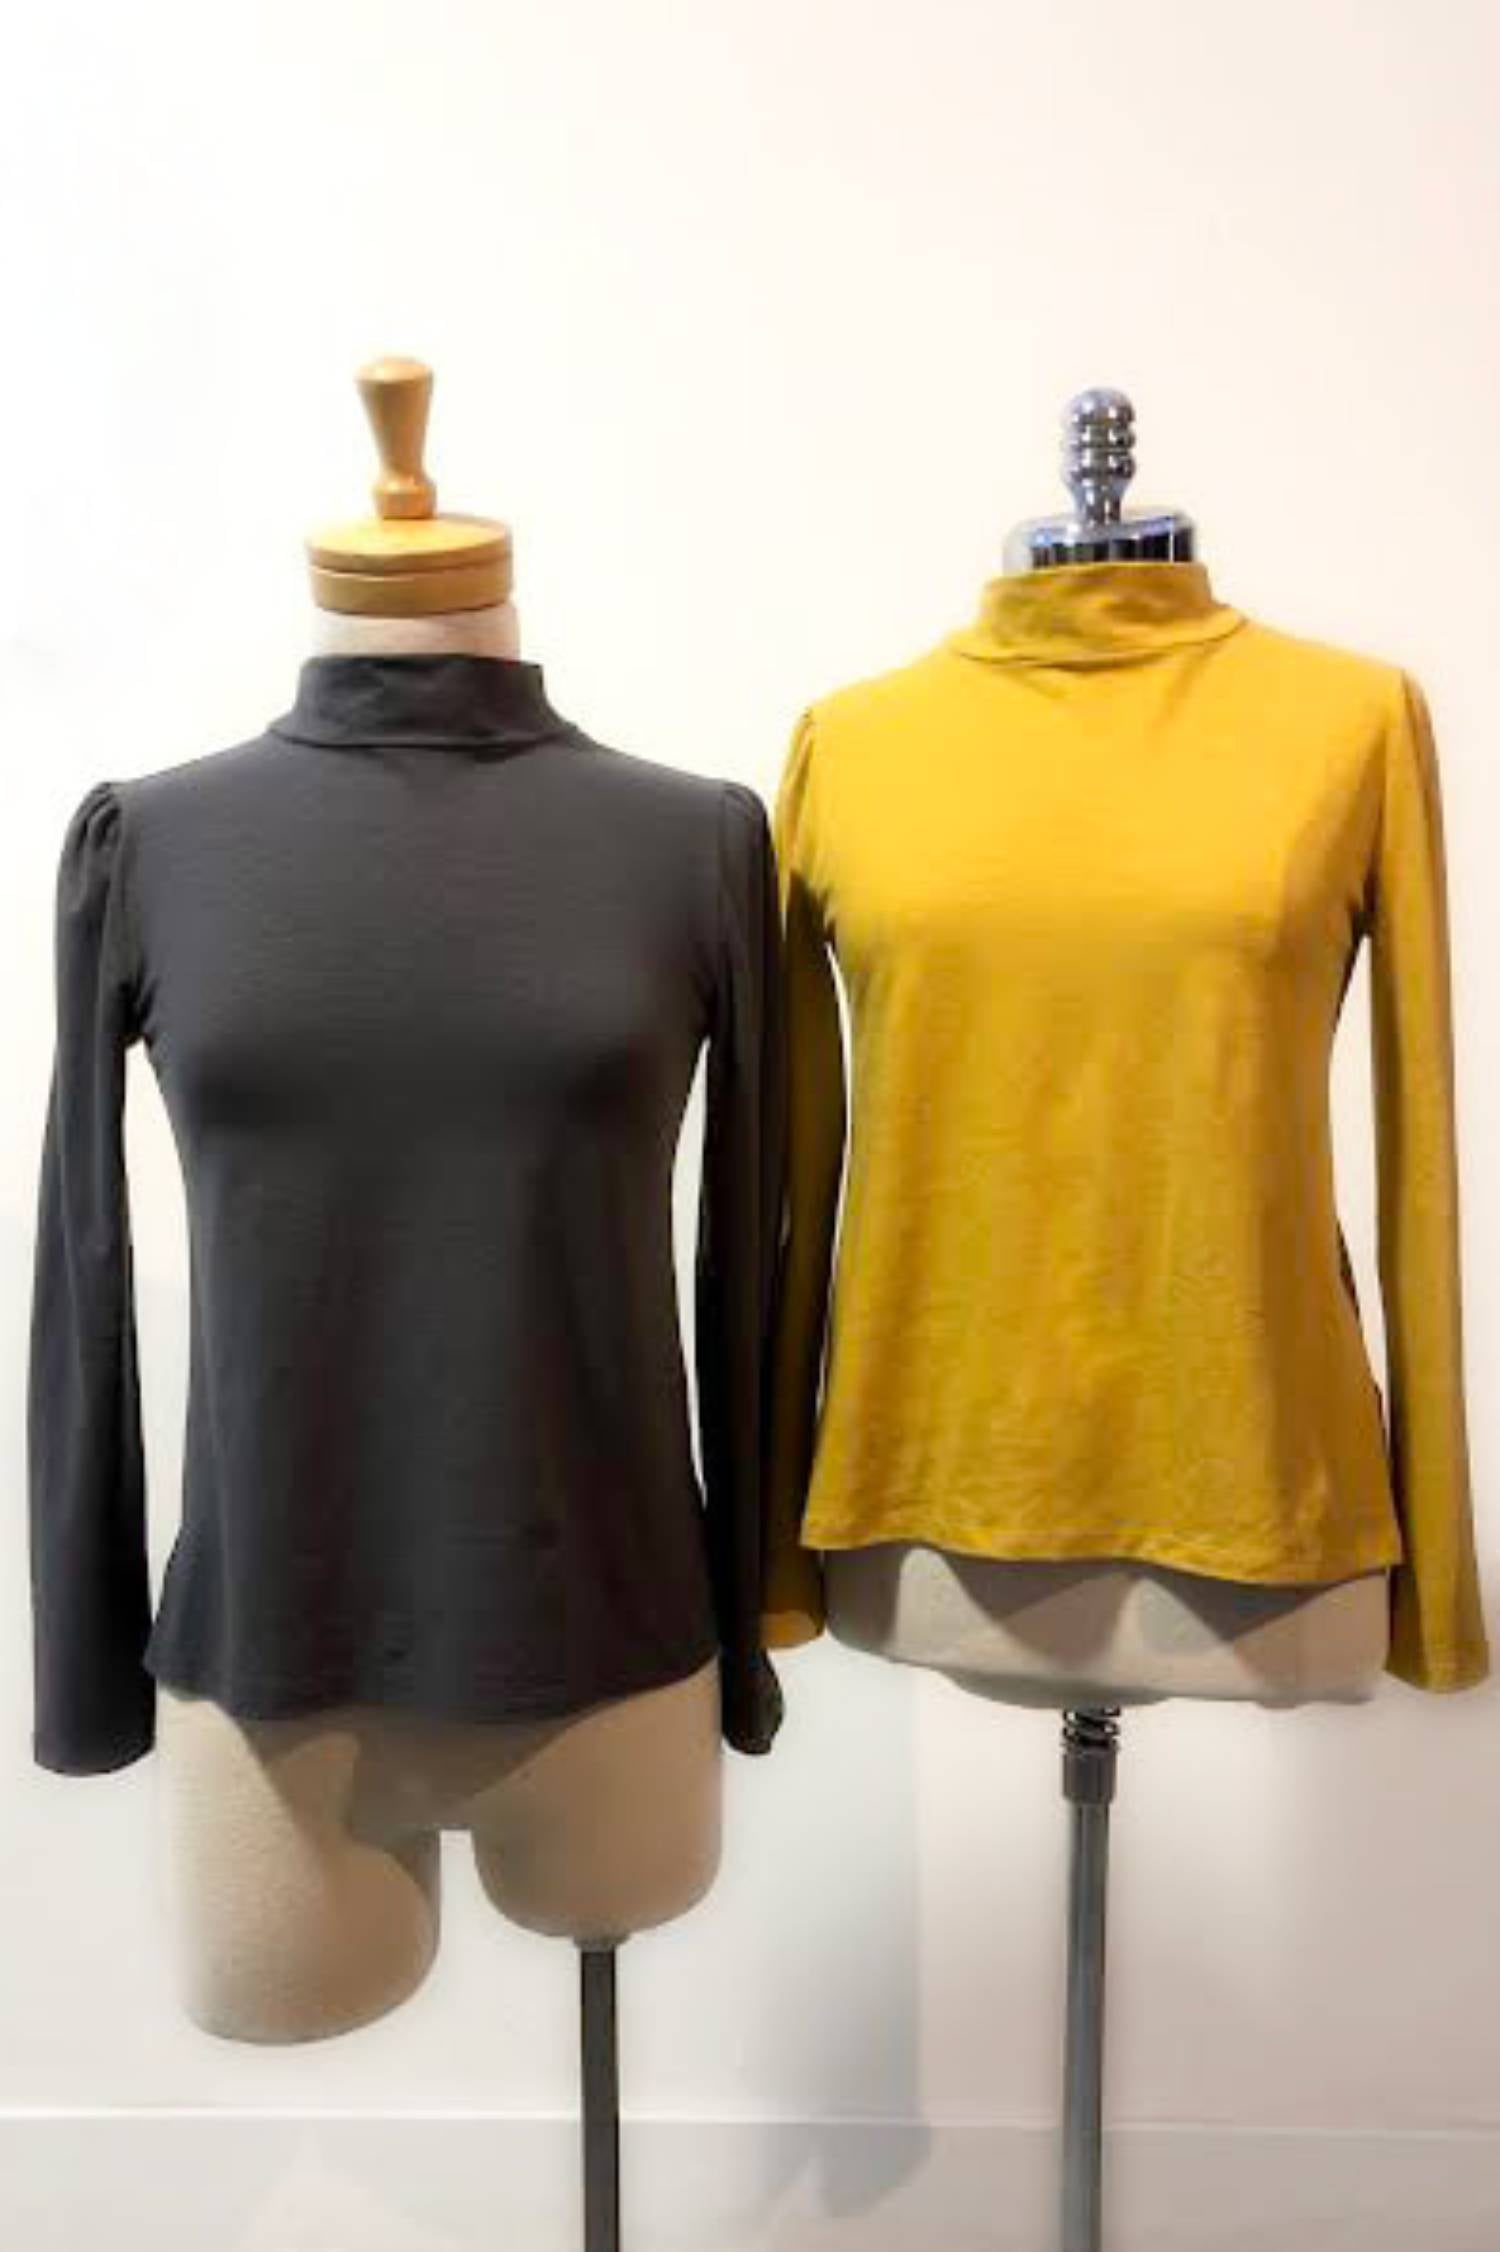 Logan Top by Ramonalisa, Mustard, Charcoal, front view, mock turtleneck, puffed sleeves, hemp/organic cotton, sizes XS to XL, made in Montreal 